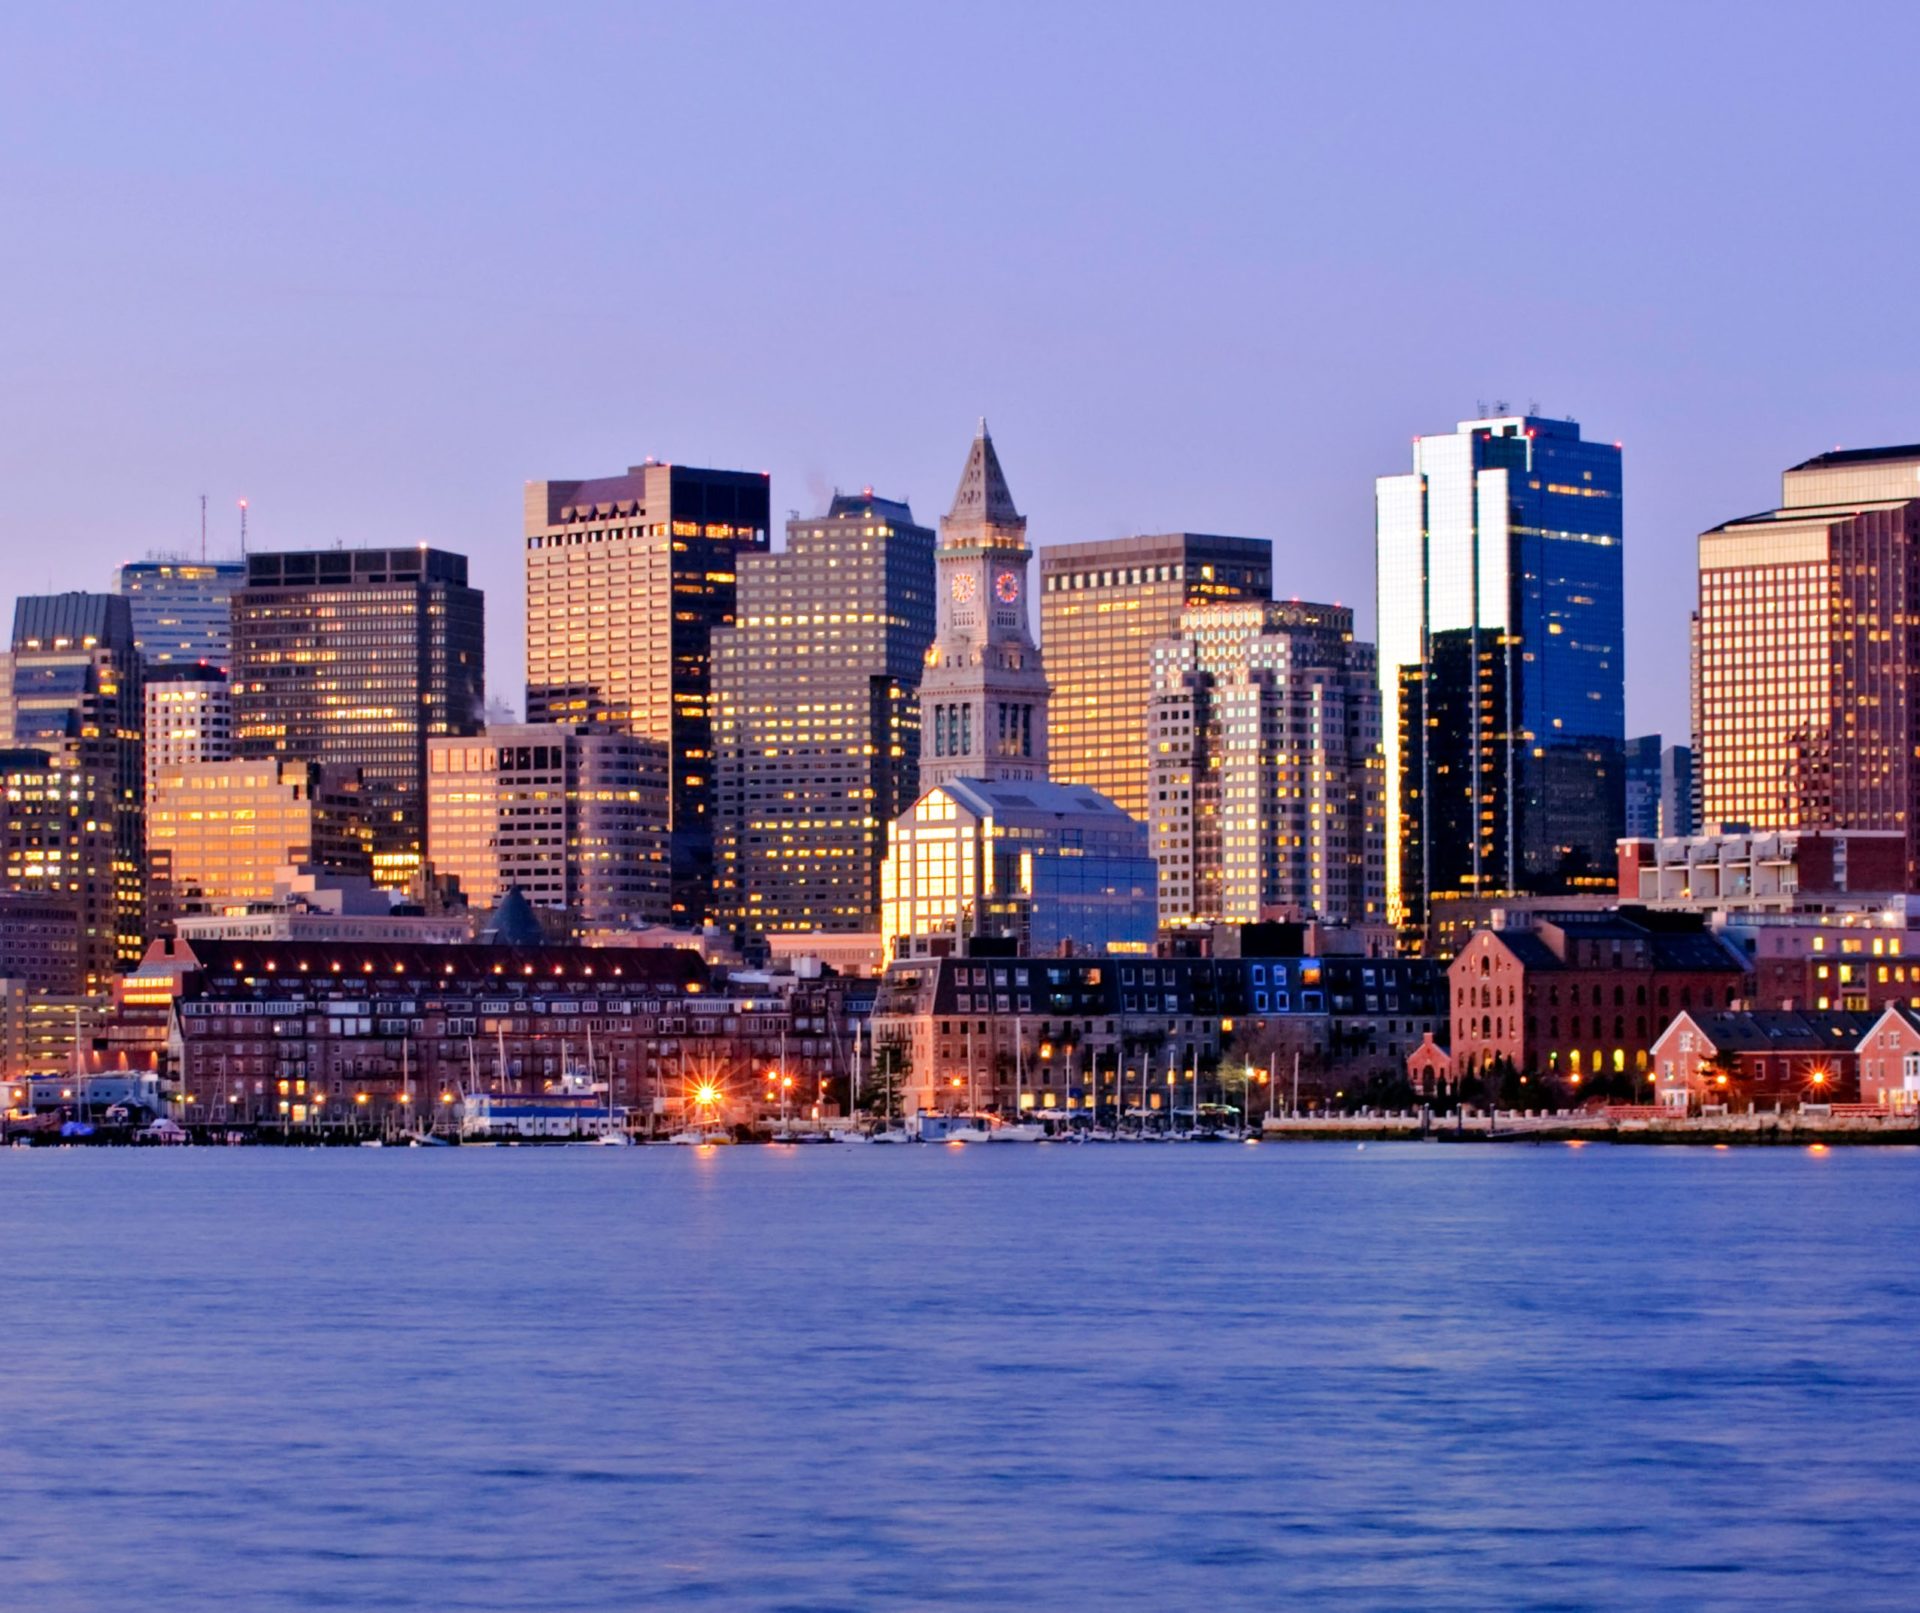 The skyline of Boston, Massachusetts in the United States in 2008.